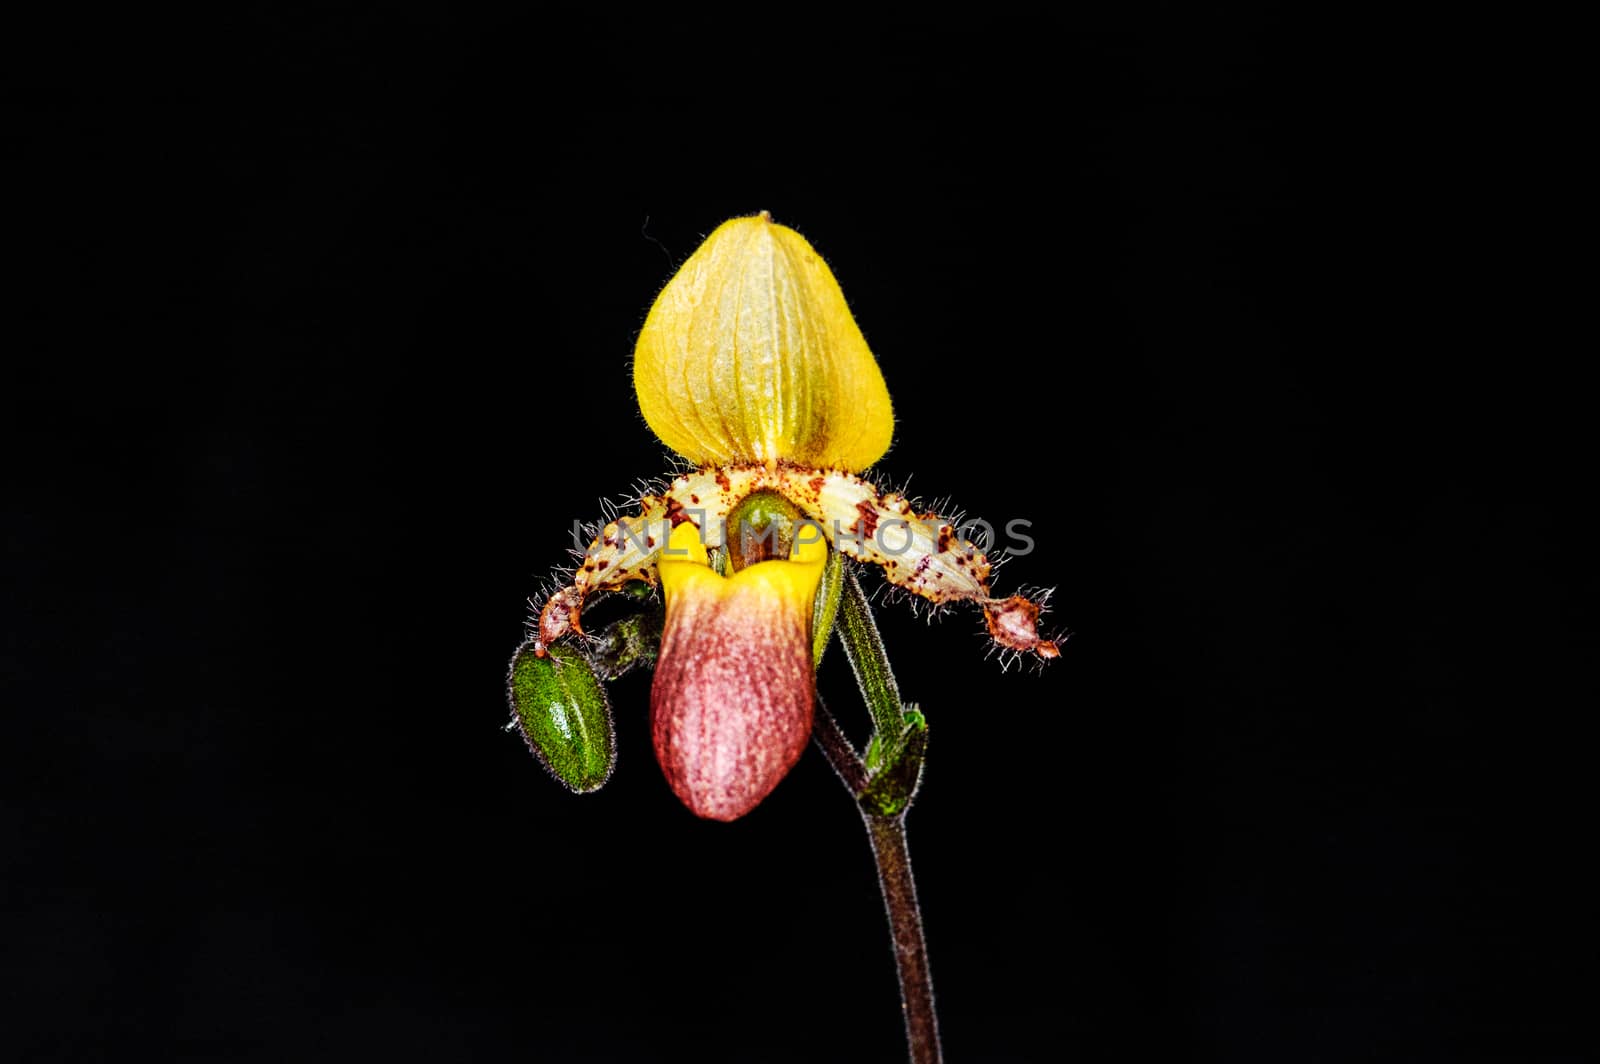 Beautiful paphiopedilum orchid by NuwatPhoto